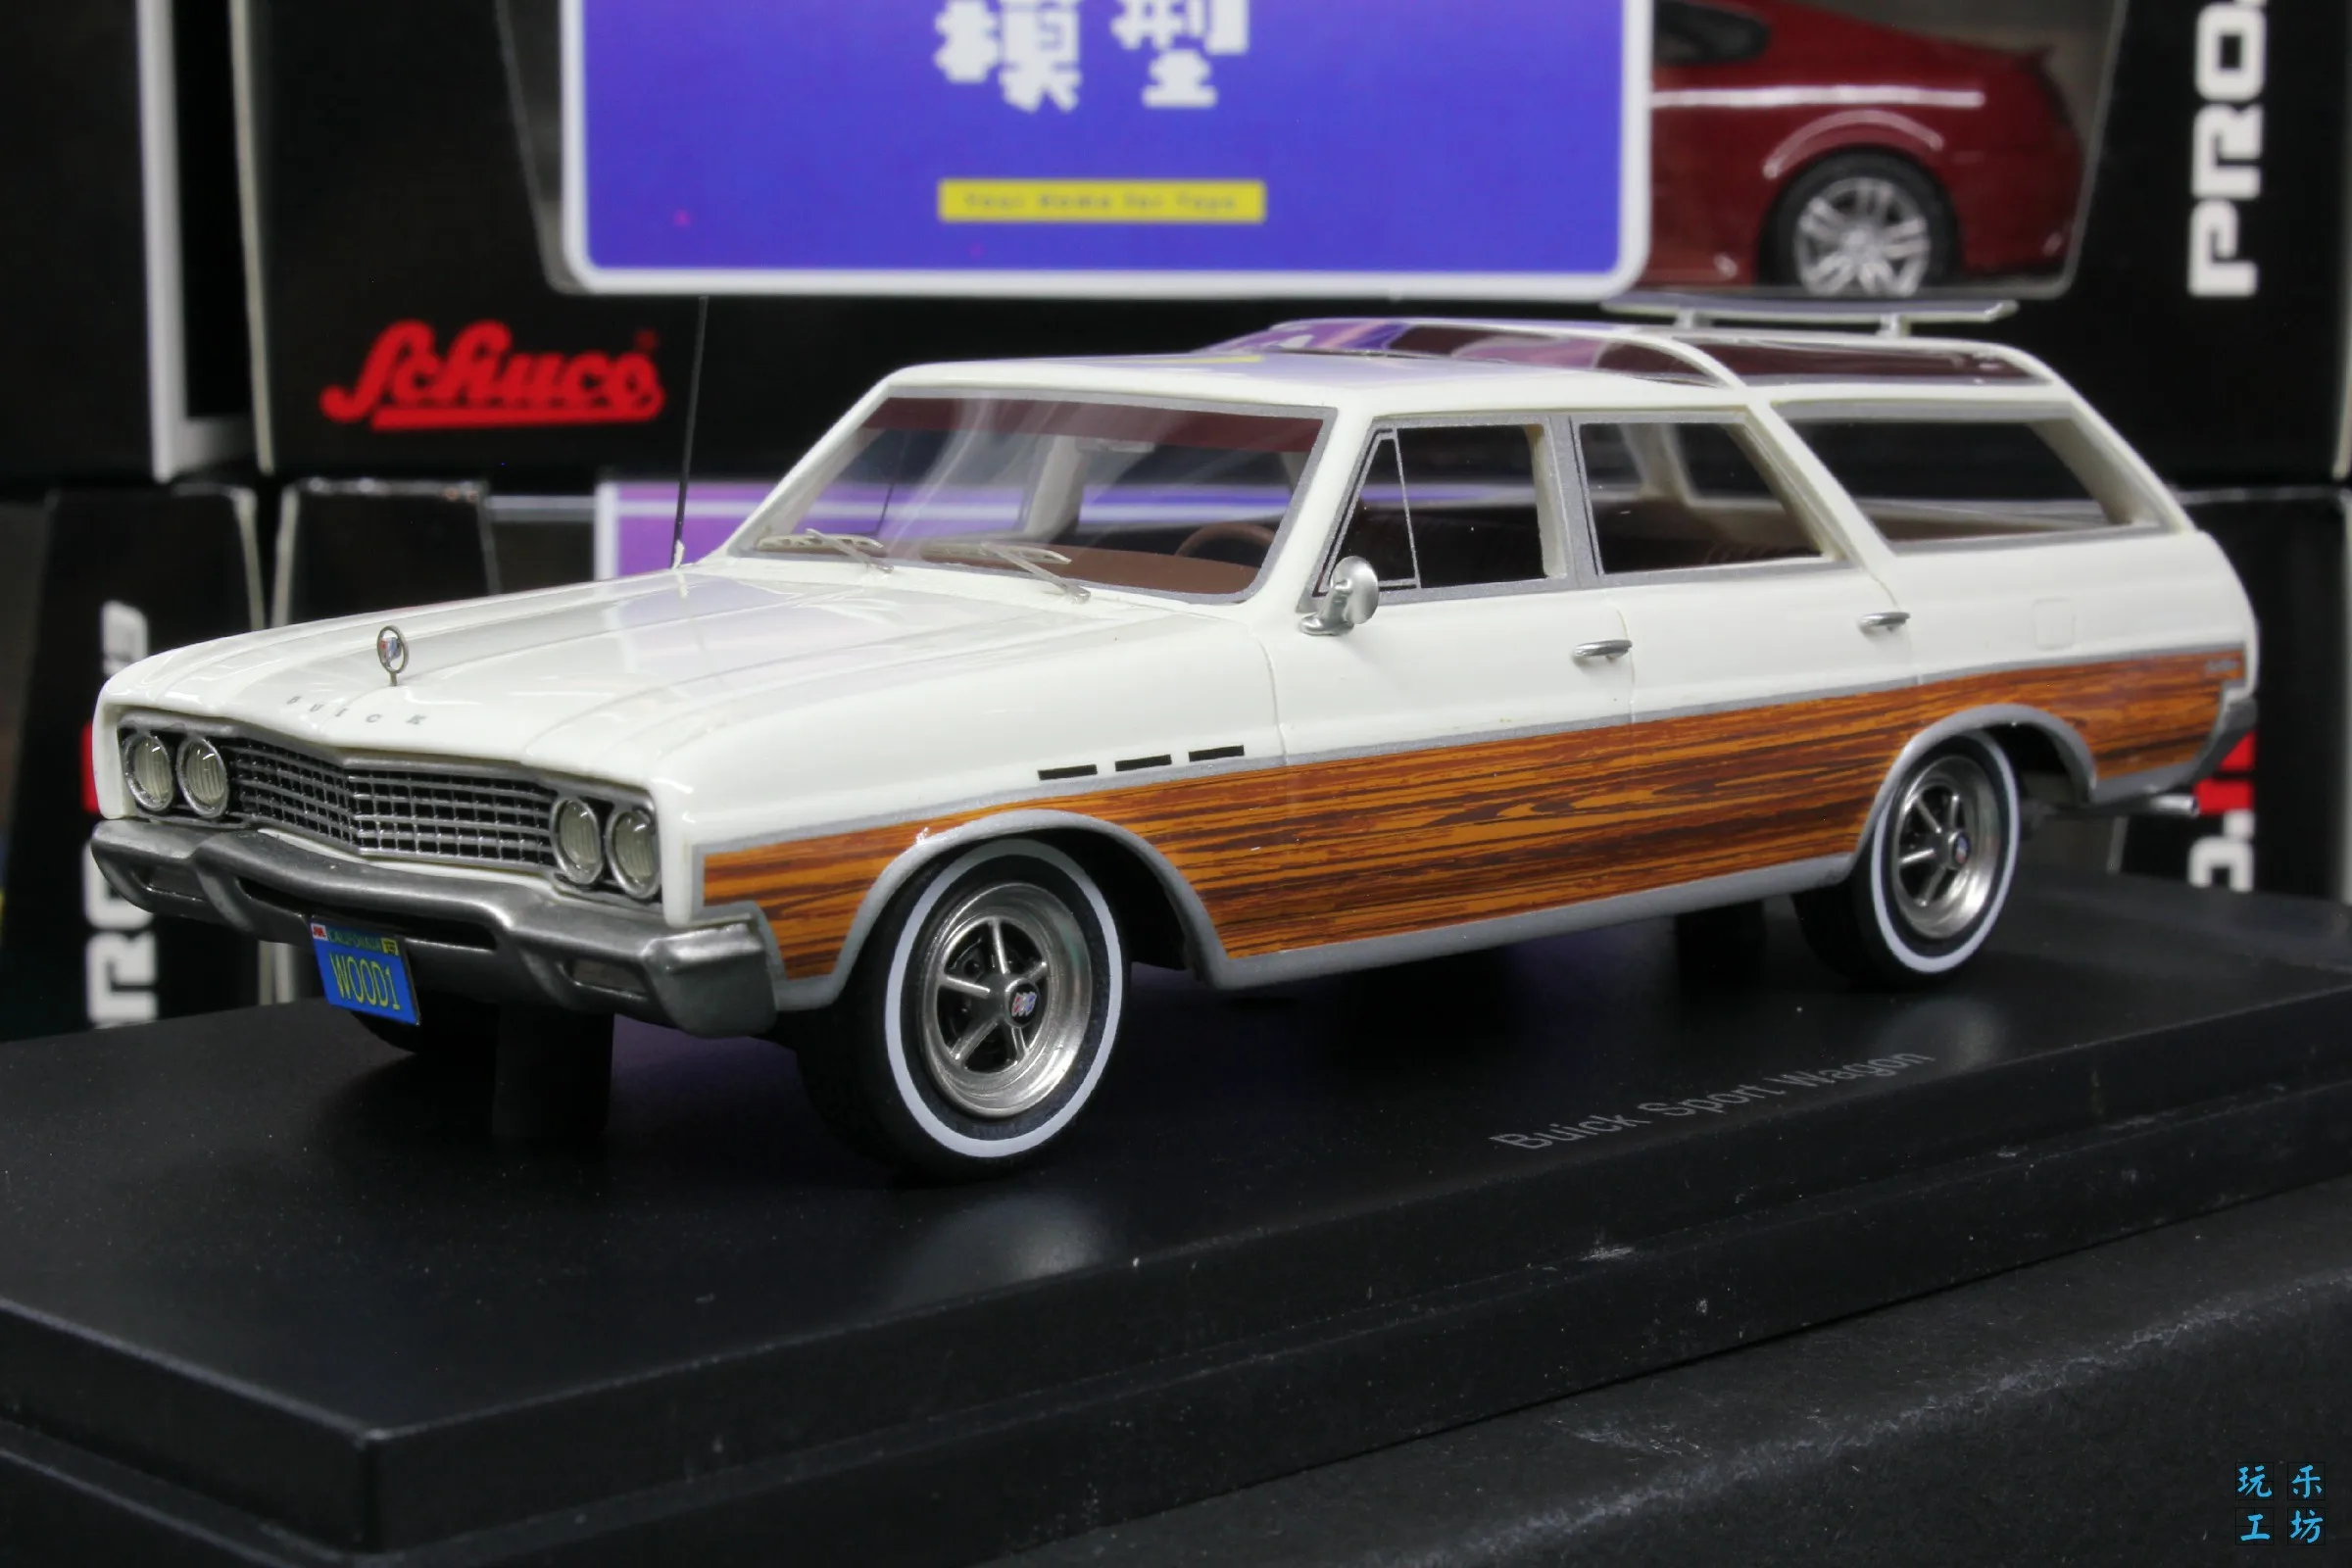 

Bos 1:43 BLUCK SPORT WAGON American Muscle Retro Car Limited Edition Resin Metal Static Car Model Toy Gift